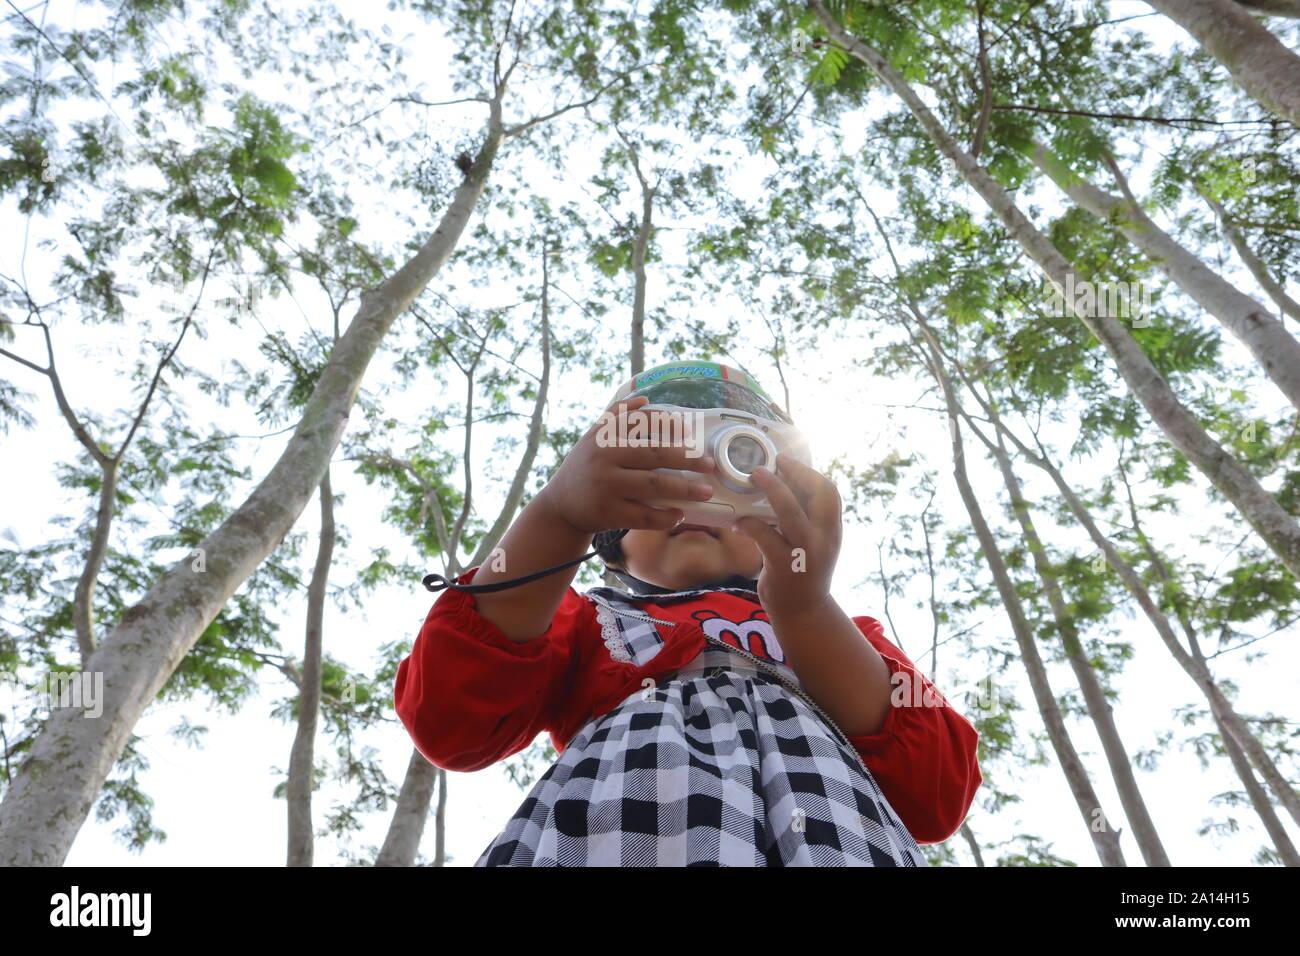 a photo of a child with a camera, technology is getting easier for allli Stock Photo